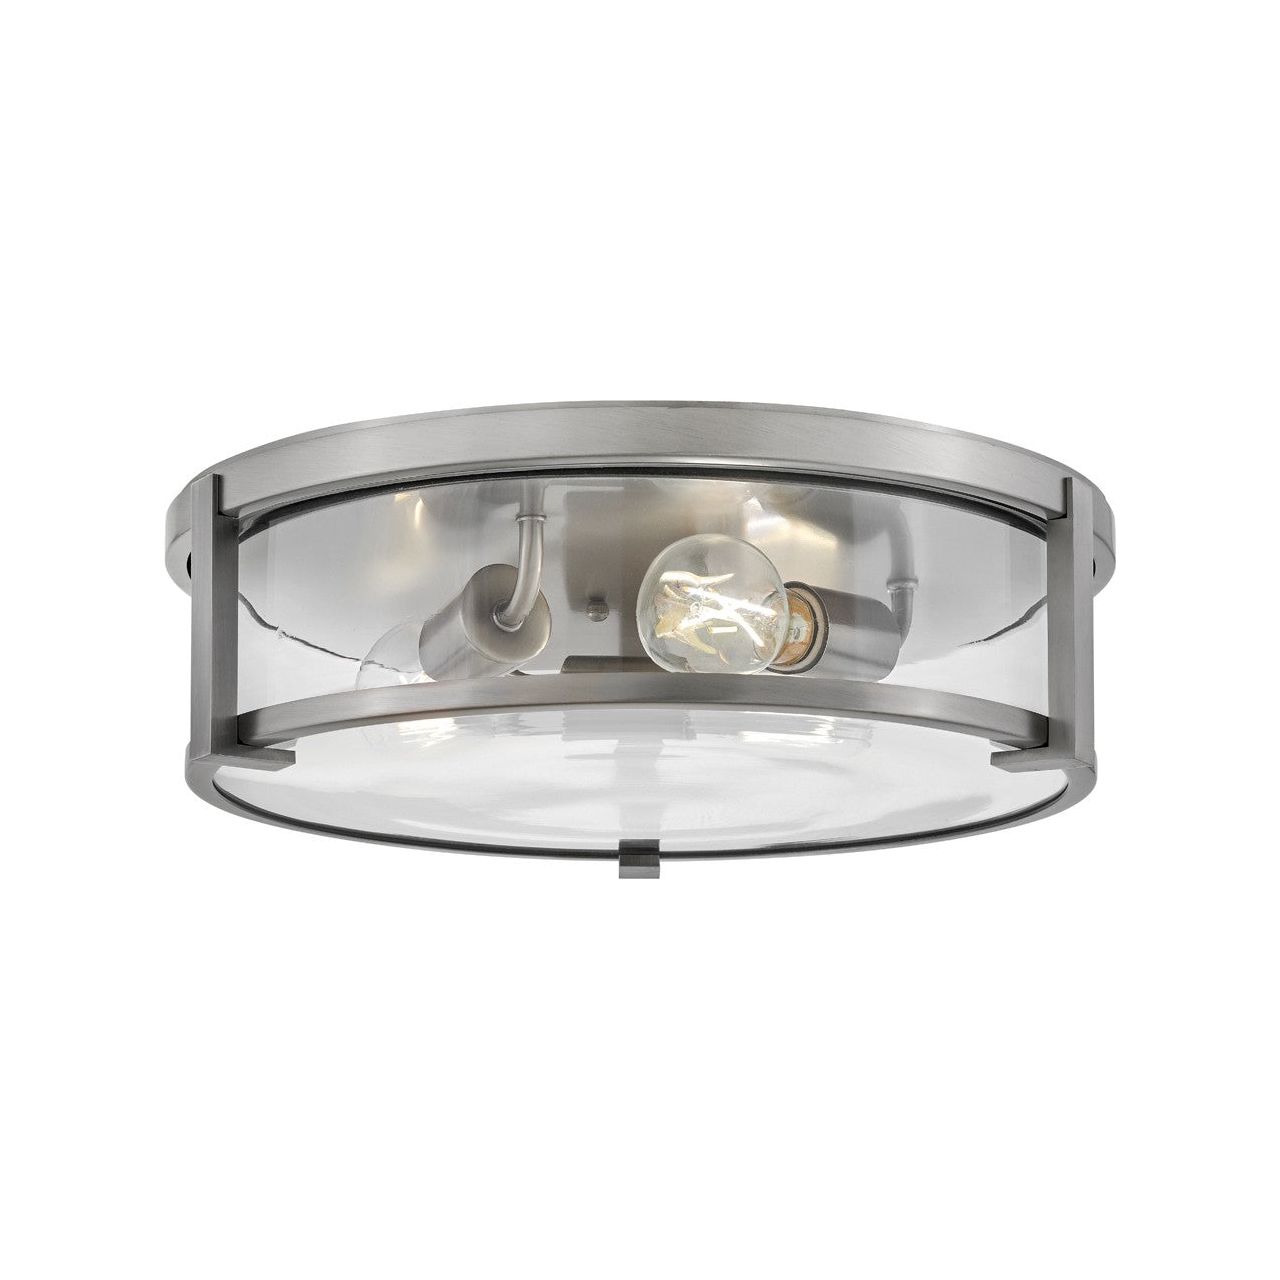 Hinkley Canada - 3243AN-CL - LED Flush Mount - Lowell - Antique Nickel